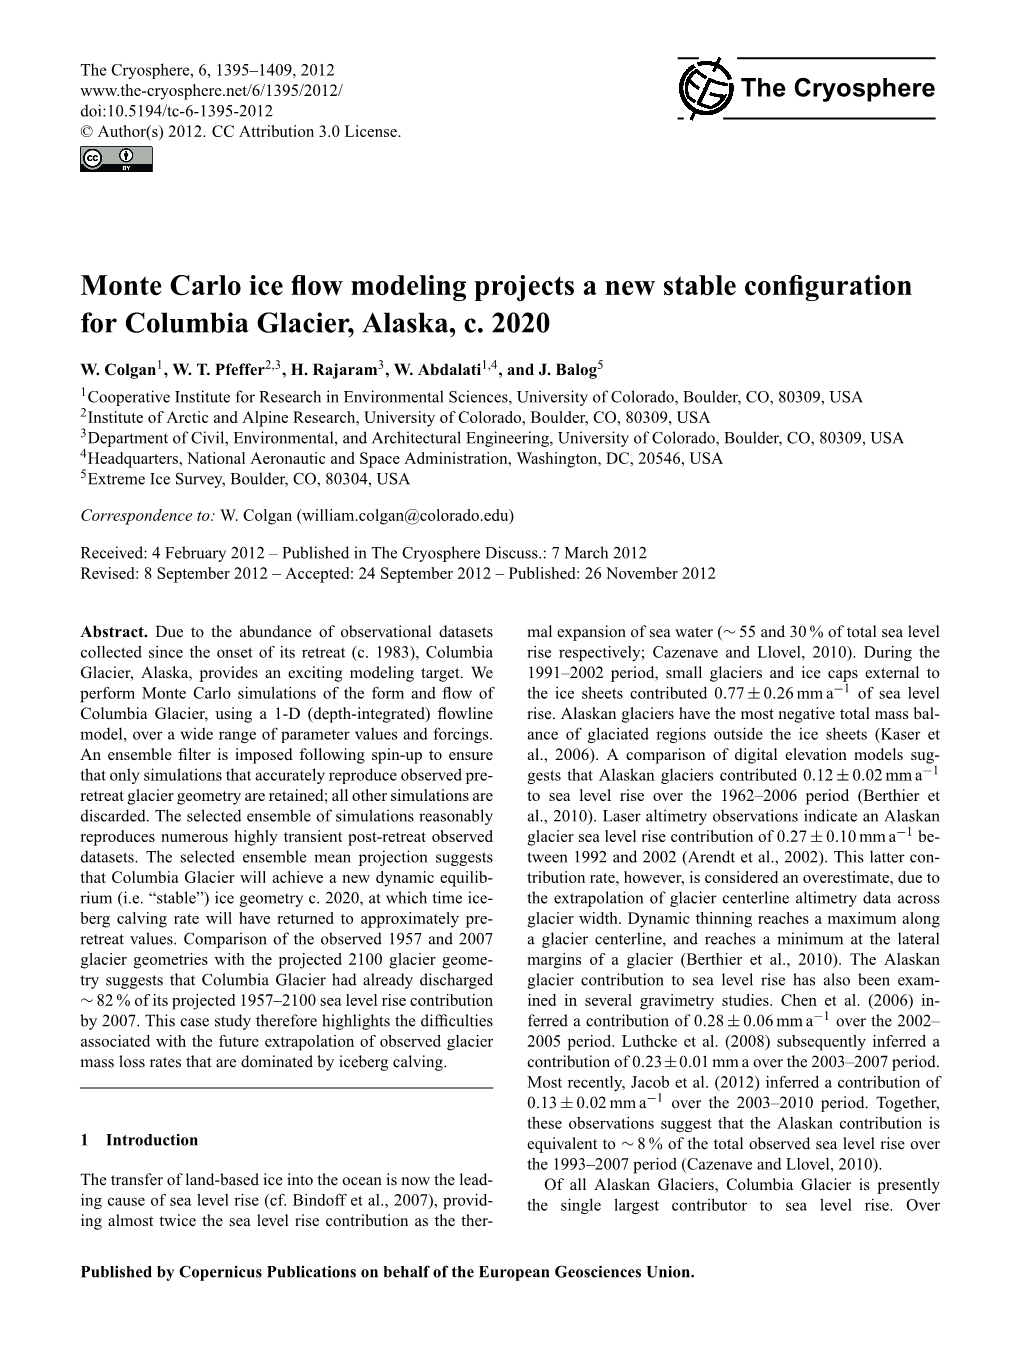 Monte Carlo Ice Flow Modeling Projects a New Stable Configuration